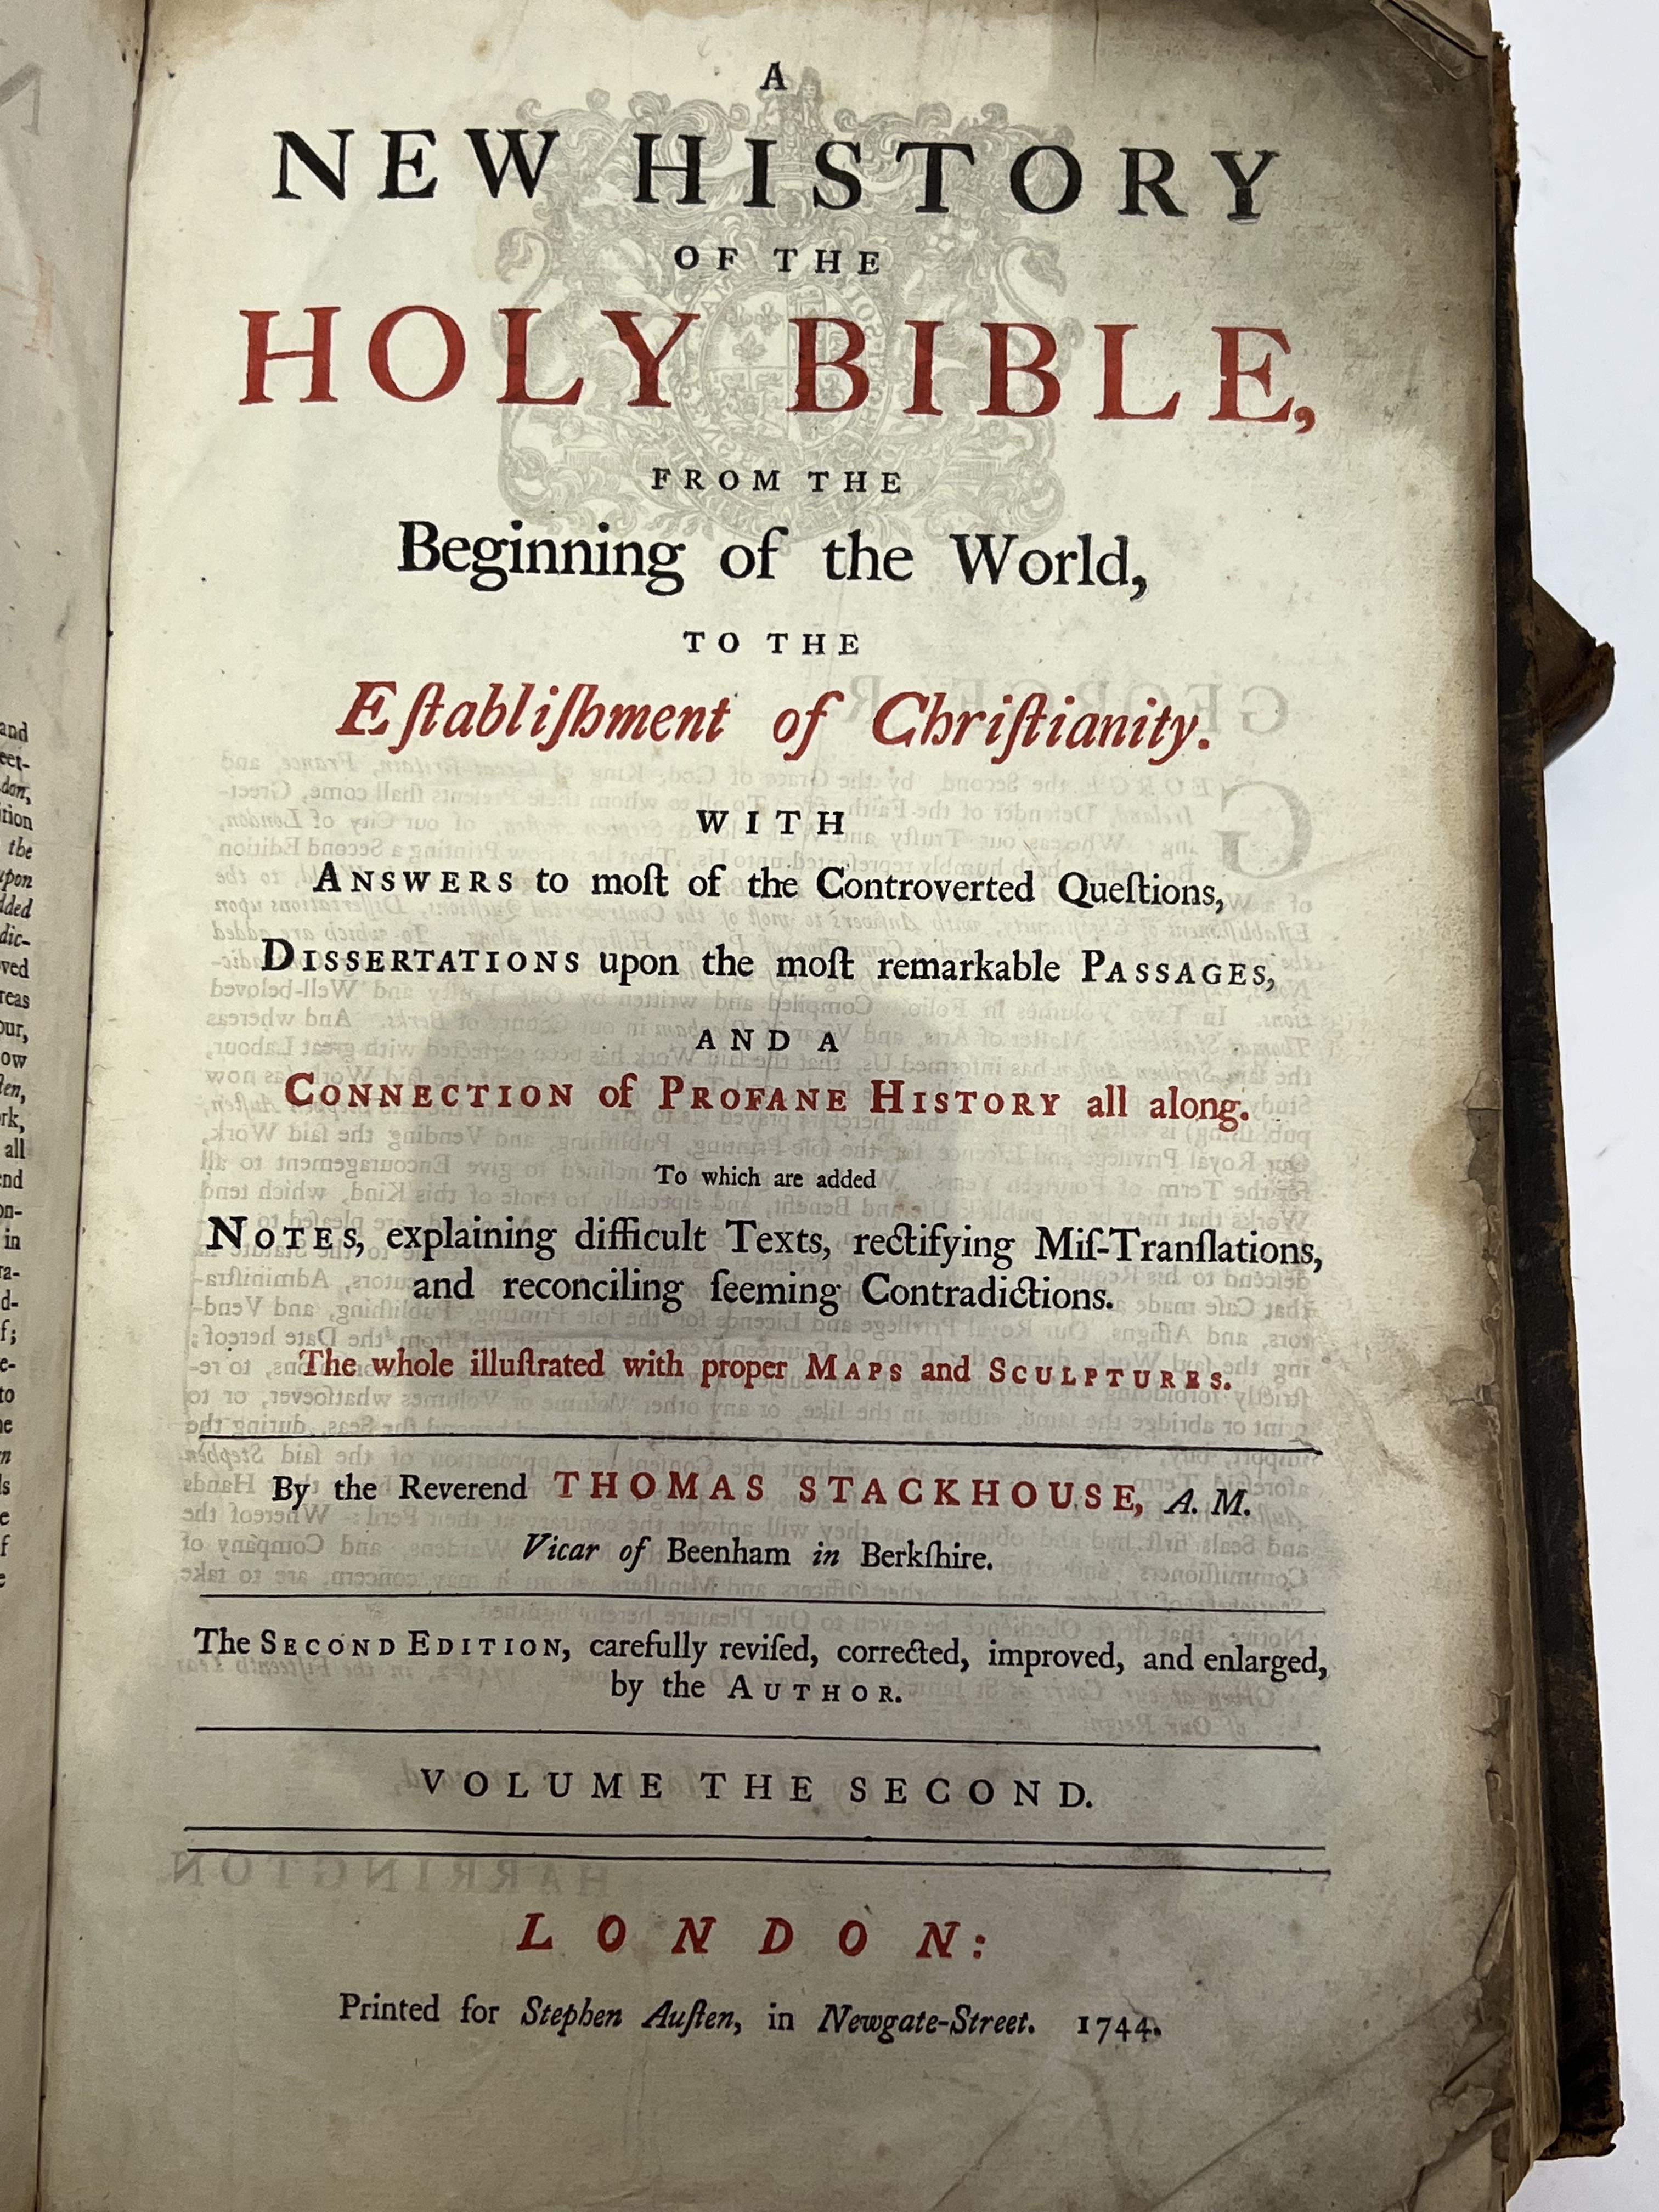 Thomas Stackhouse, A New History of the Holy Bible, from the Beginning of the World to the - Image 3 of 3